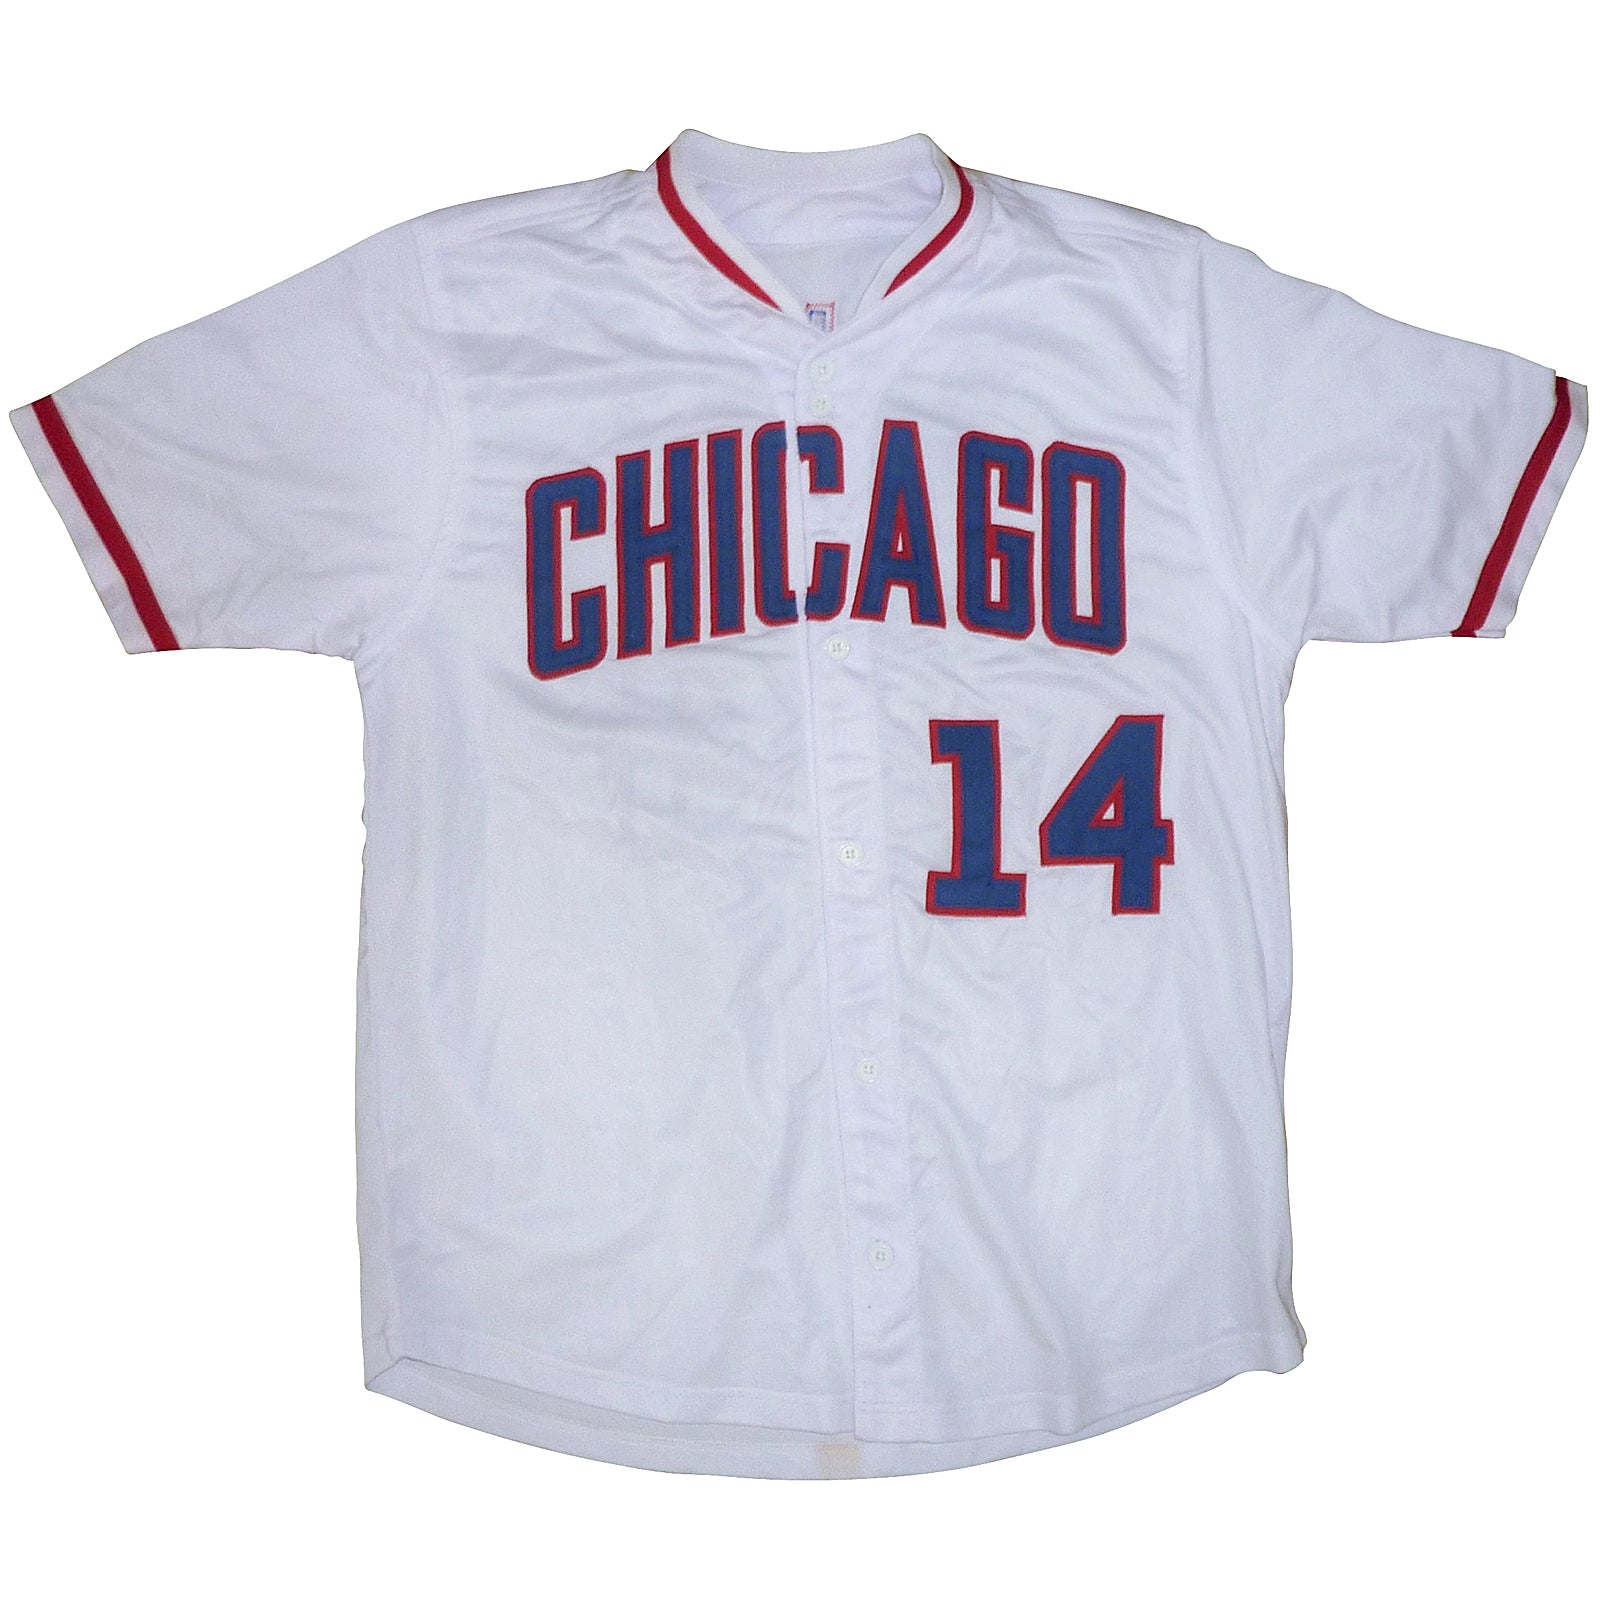 Latitude Sports Marketing Ernie Banks #14 Chicago Cubs Autographed Jersey